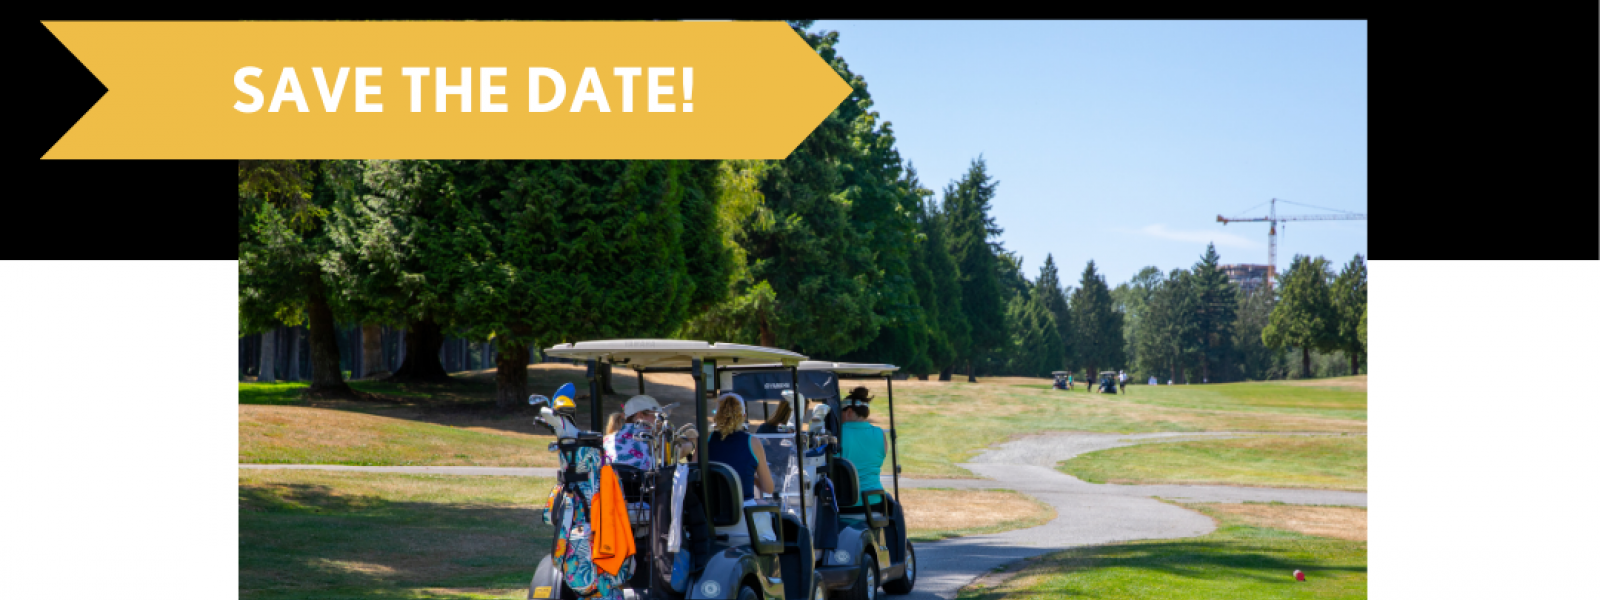 CREW Vancouver Golf save the date IF 1